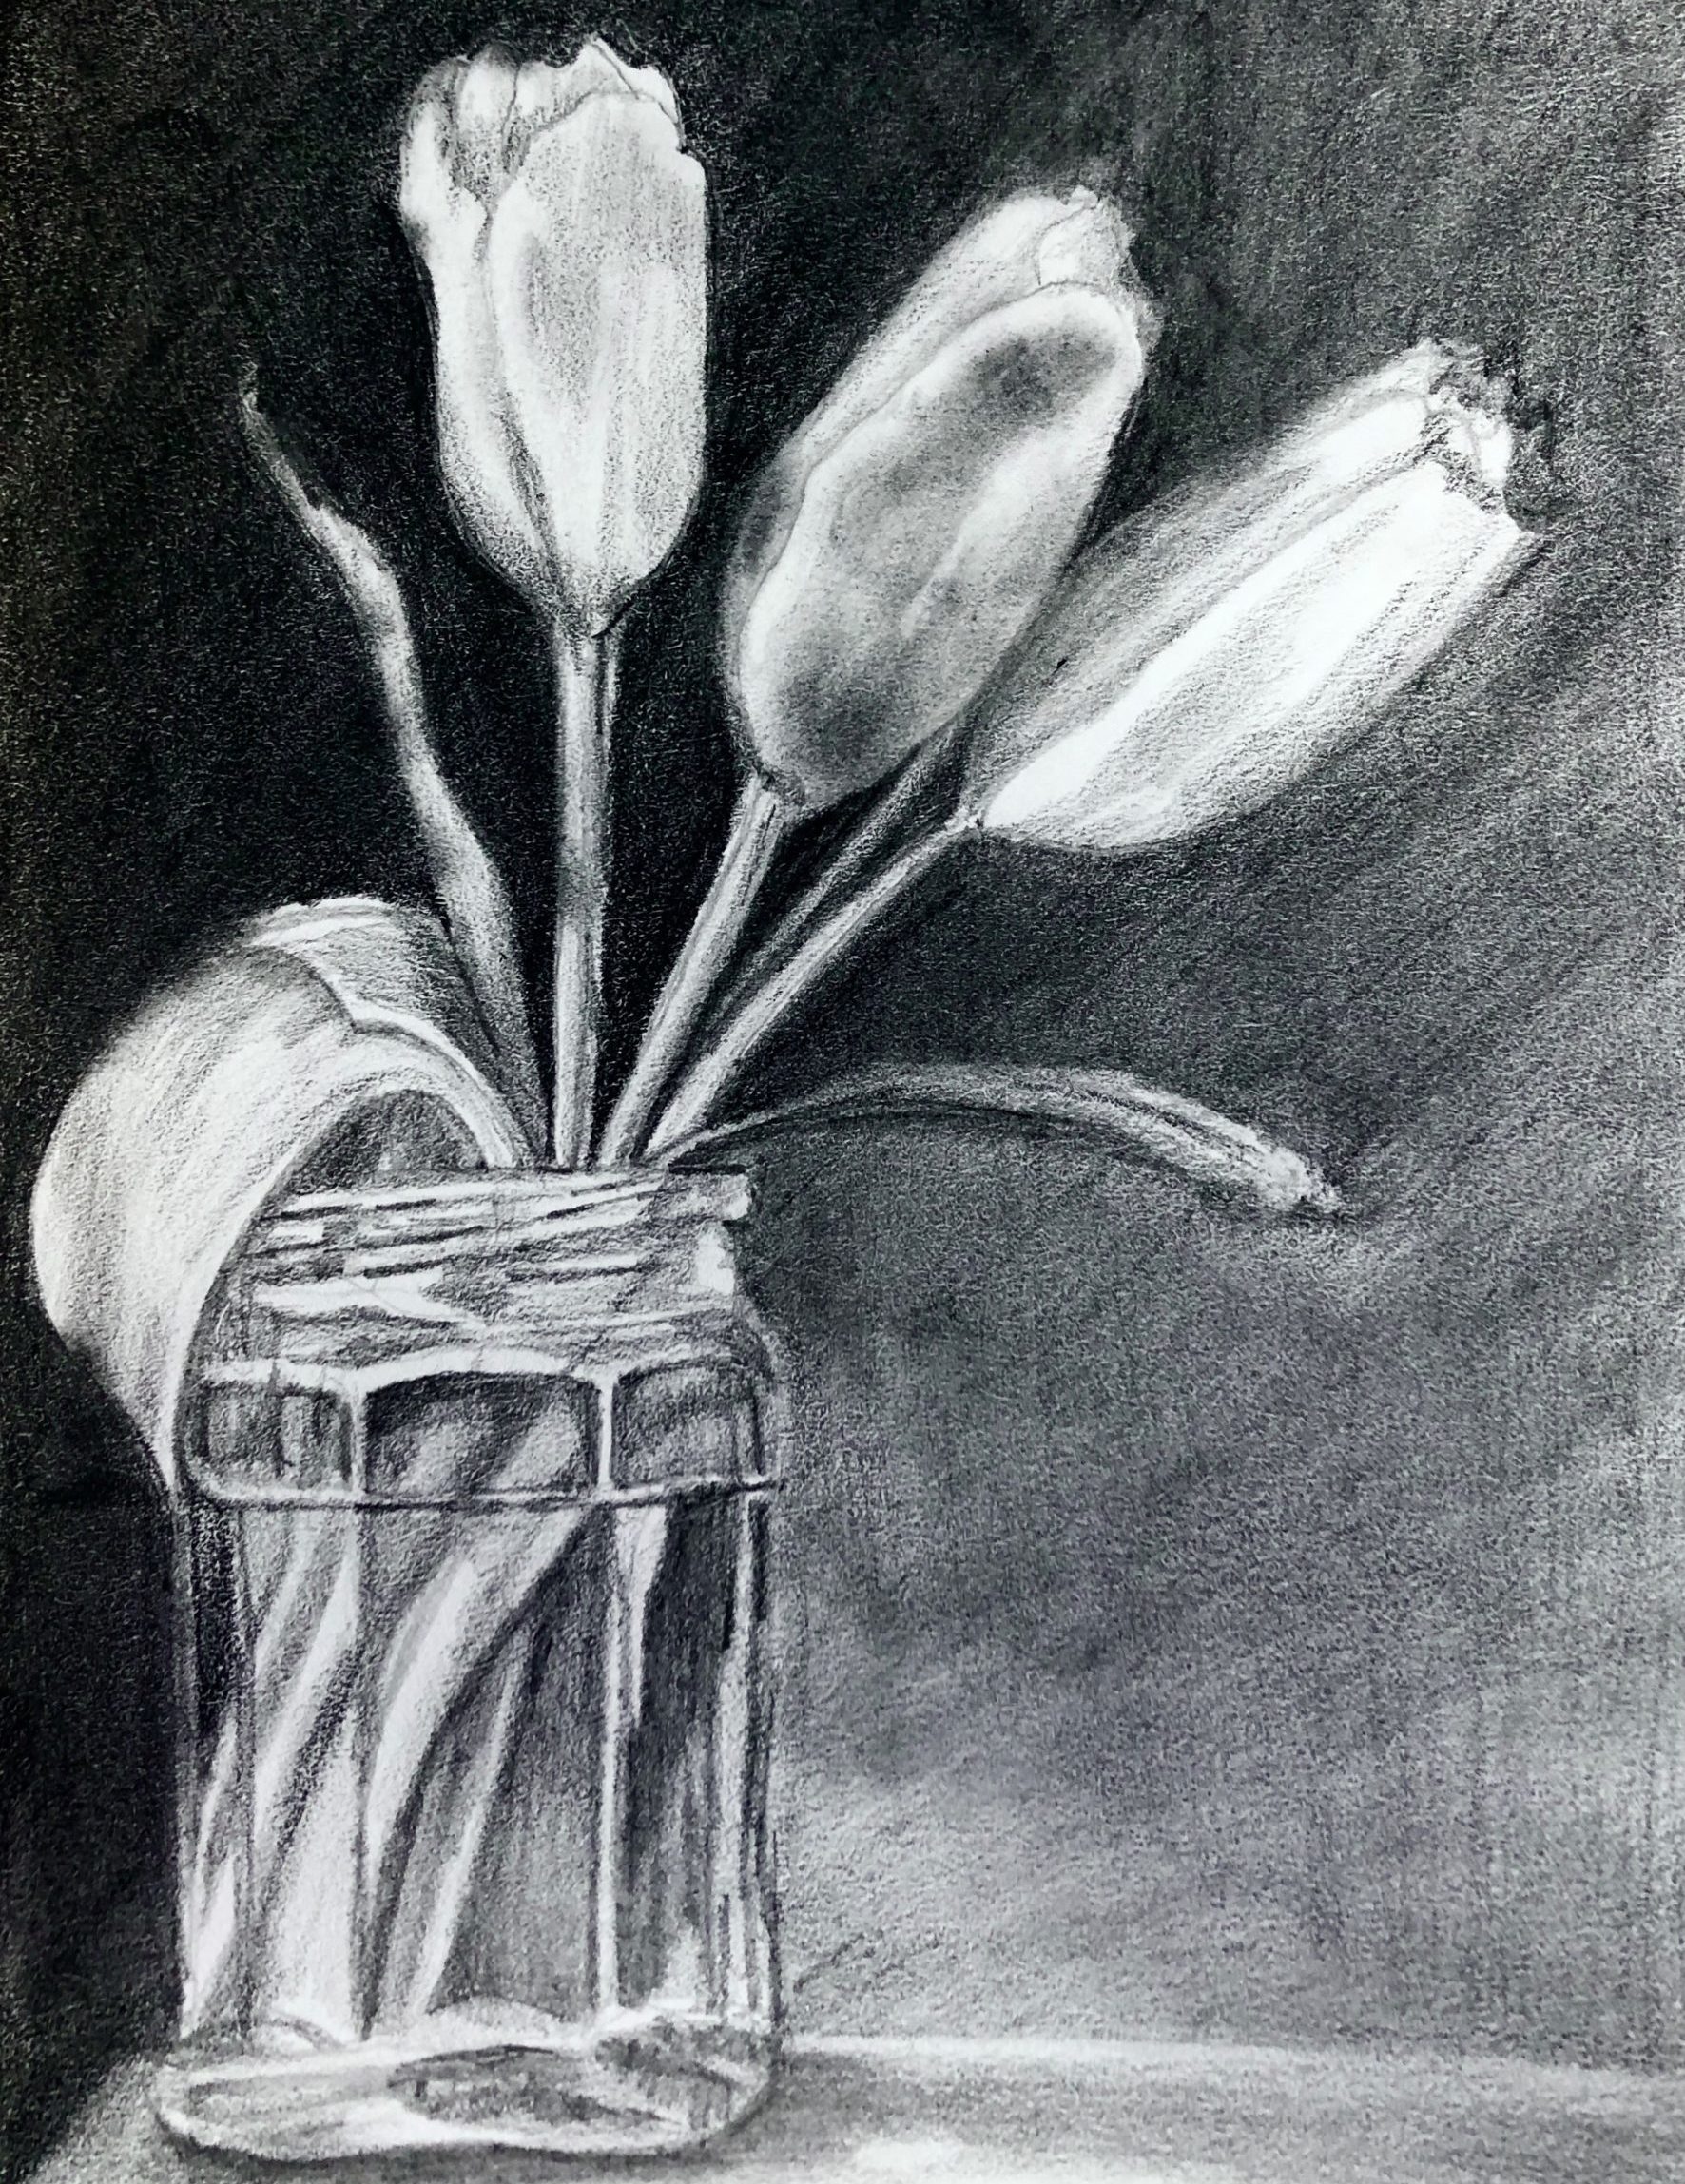 "Nature's Way" - Drawing Nature from Life (Studio)